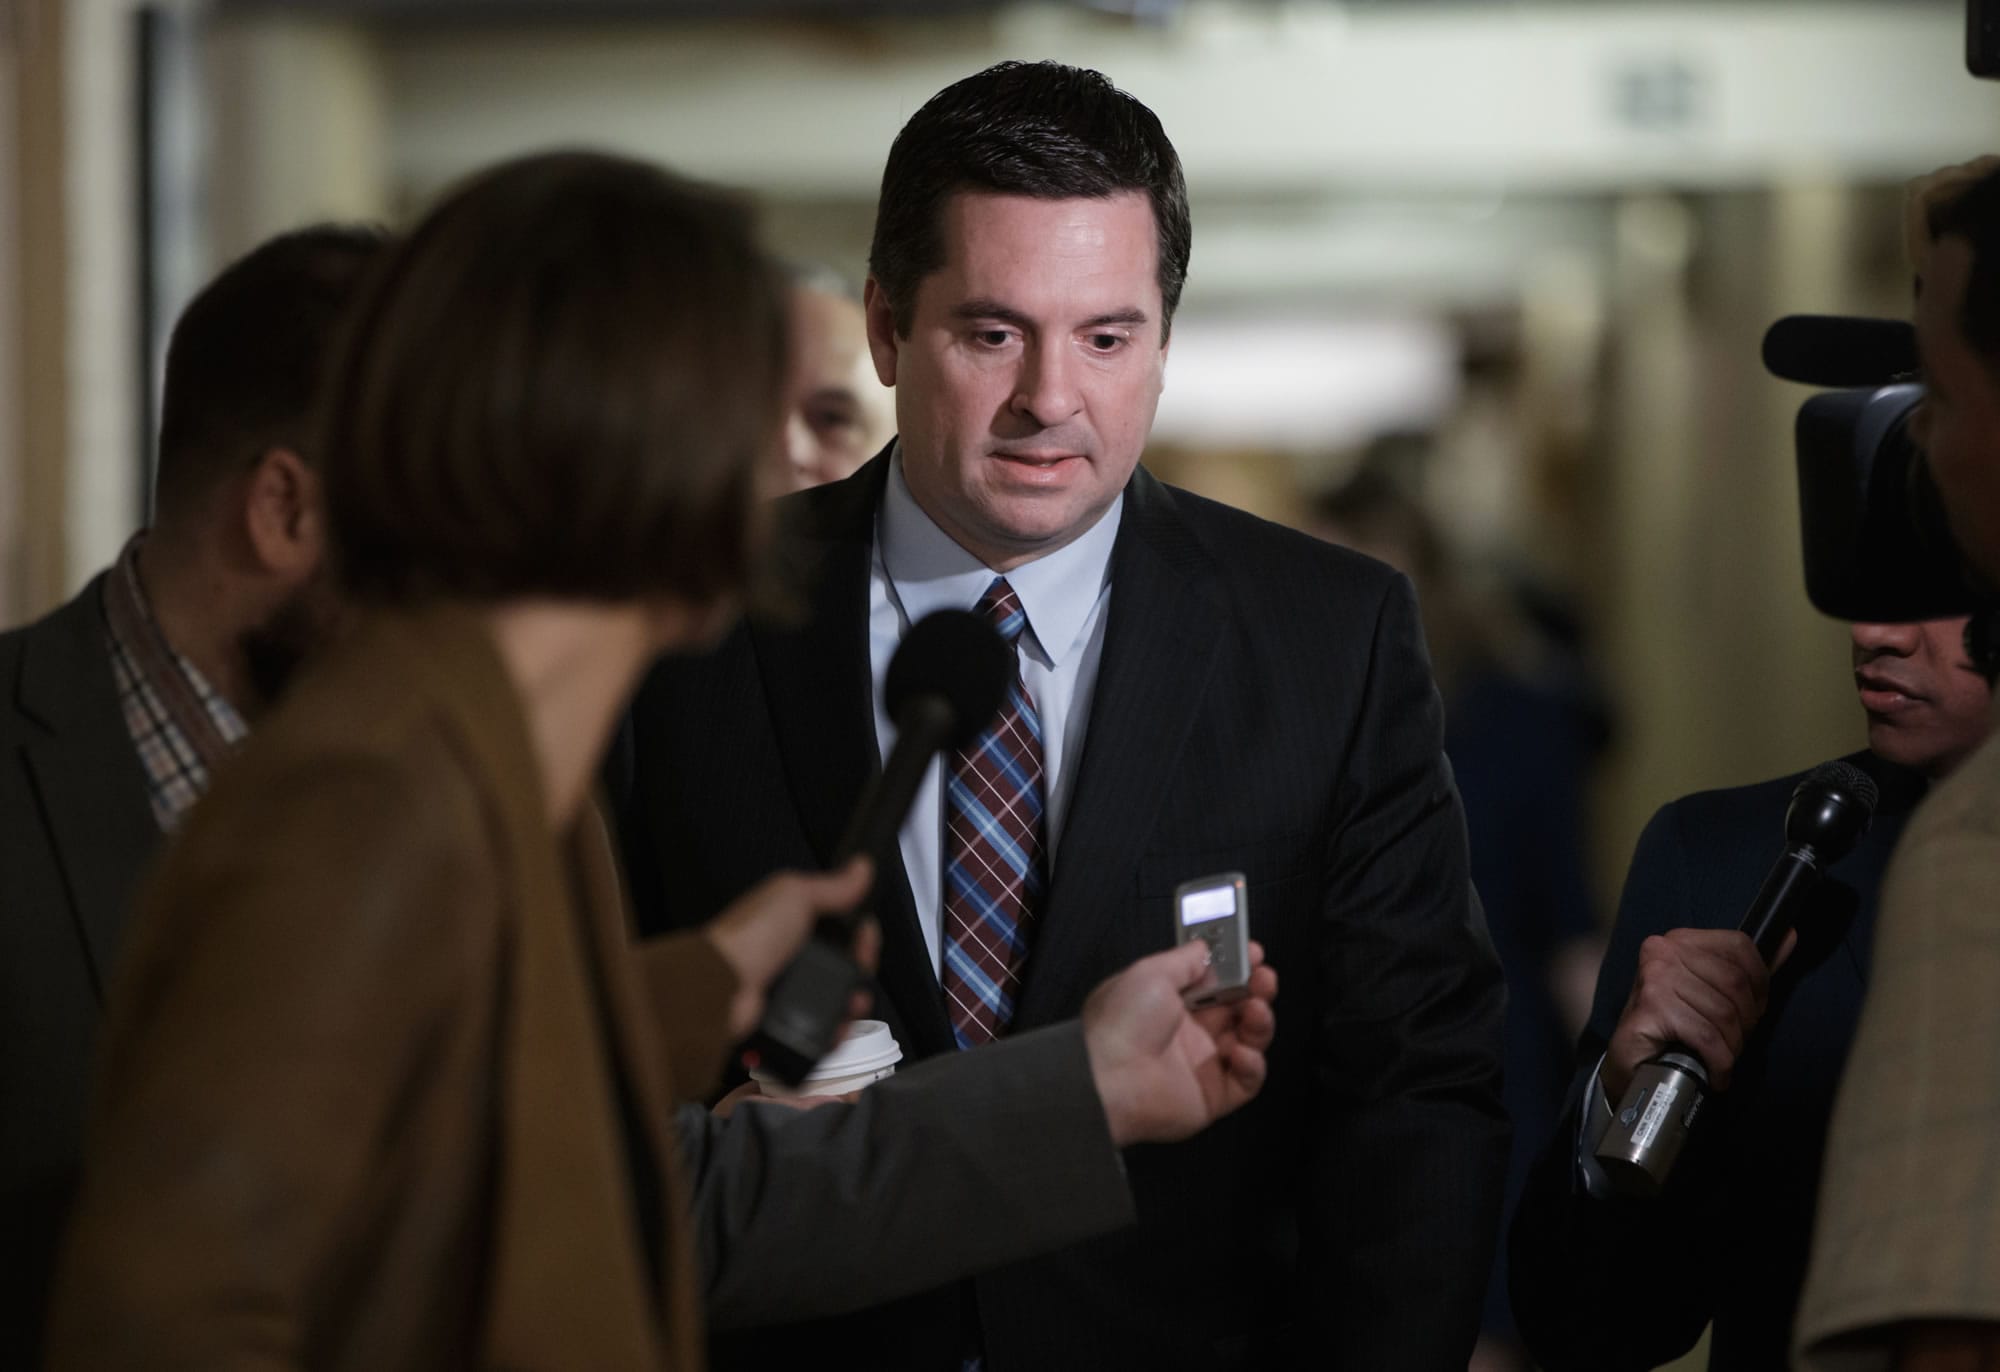 FILE - In this March 28, 2017 file photo, House Intelligence Committee Chairman Rep. Devin Nunes, R-Calif. is pursued by reporters on Capitol Hill in Washington. Nunes says he’s temporarily stepping aside from Russia probe amid ethics accusations.  (AP Photo/J.